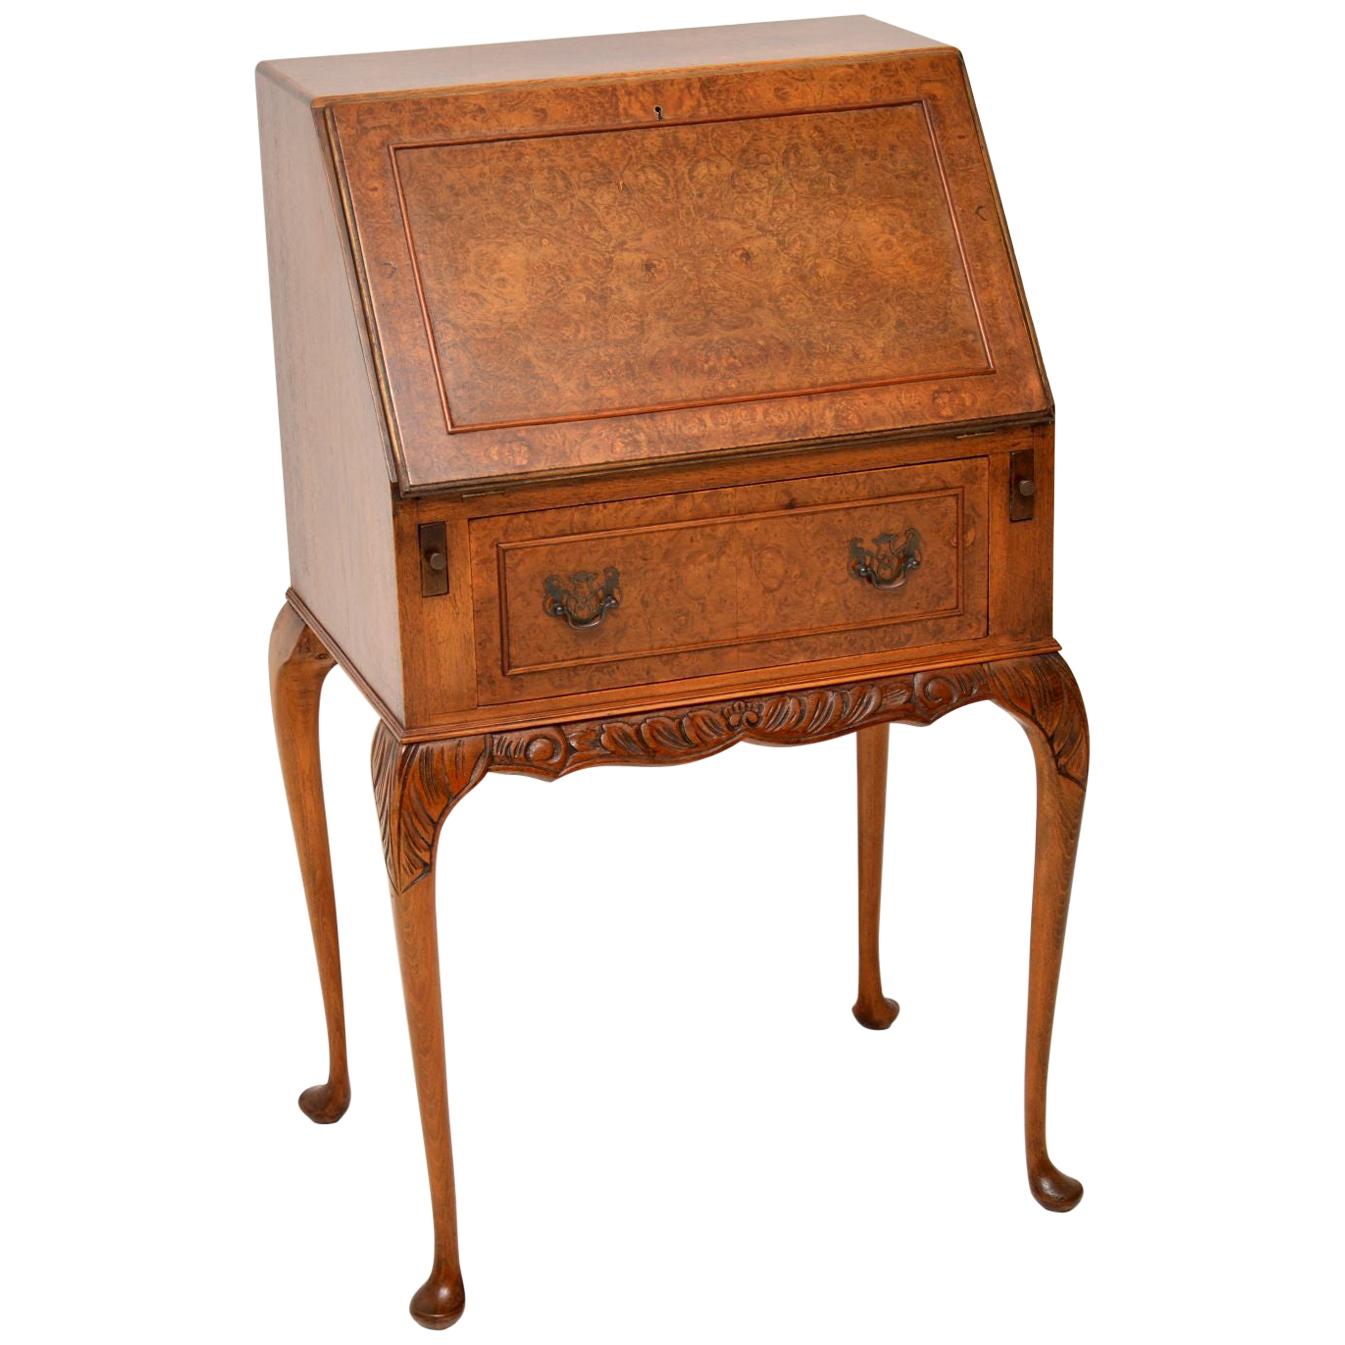 Small antique Queen Anne style burr walnut bureau in lovely condition with a nice warm color and dating from circa 1930s period. It has a pull down flap which rests on pull out loafers. The inside has a tooled leather writing surface with a single